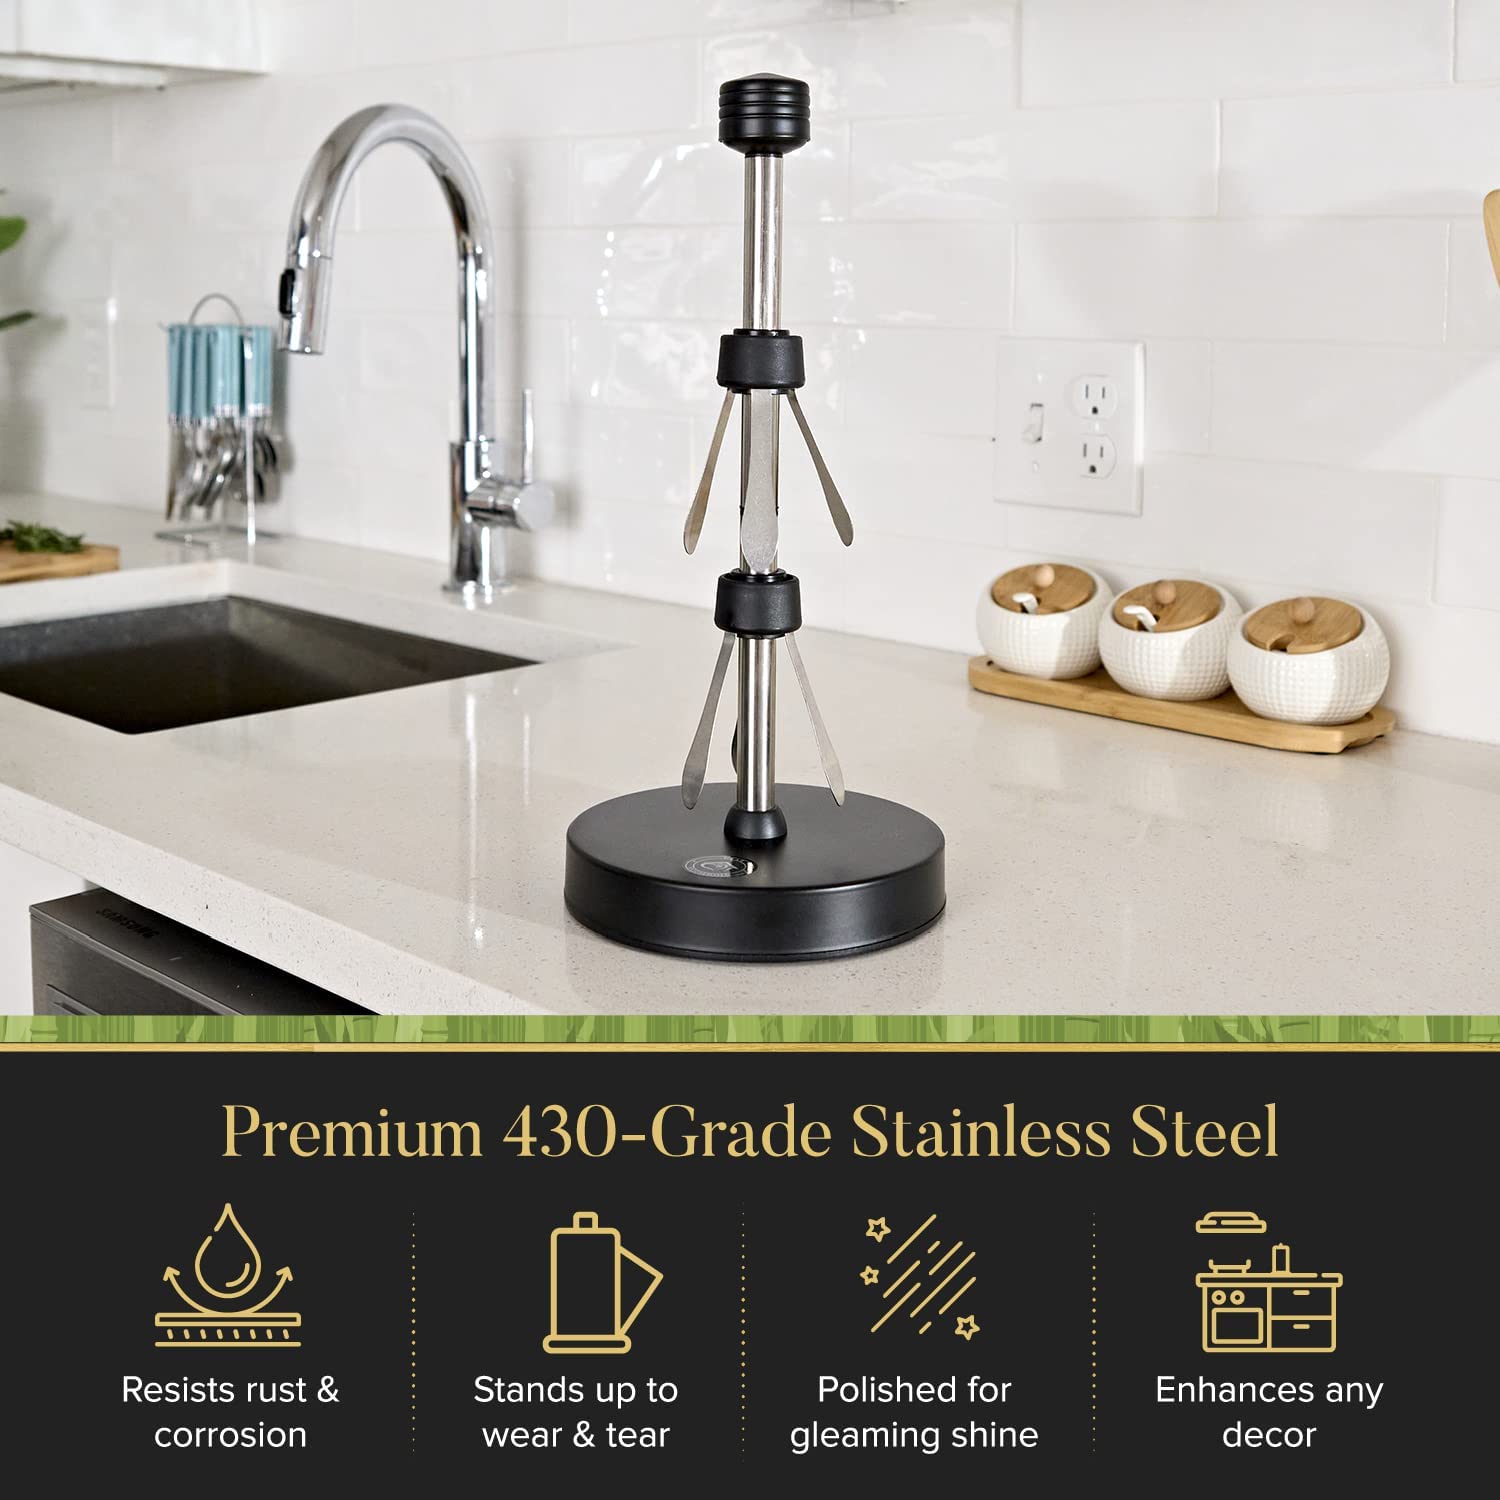 Dear Household Stainless Steel Paper Towel Holder Stand Designed for Easy One- Handed Operation - This Sturdy Weighted Paper Towel Holder Countertop